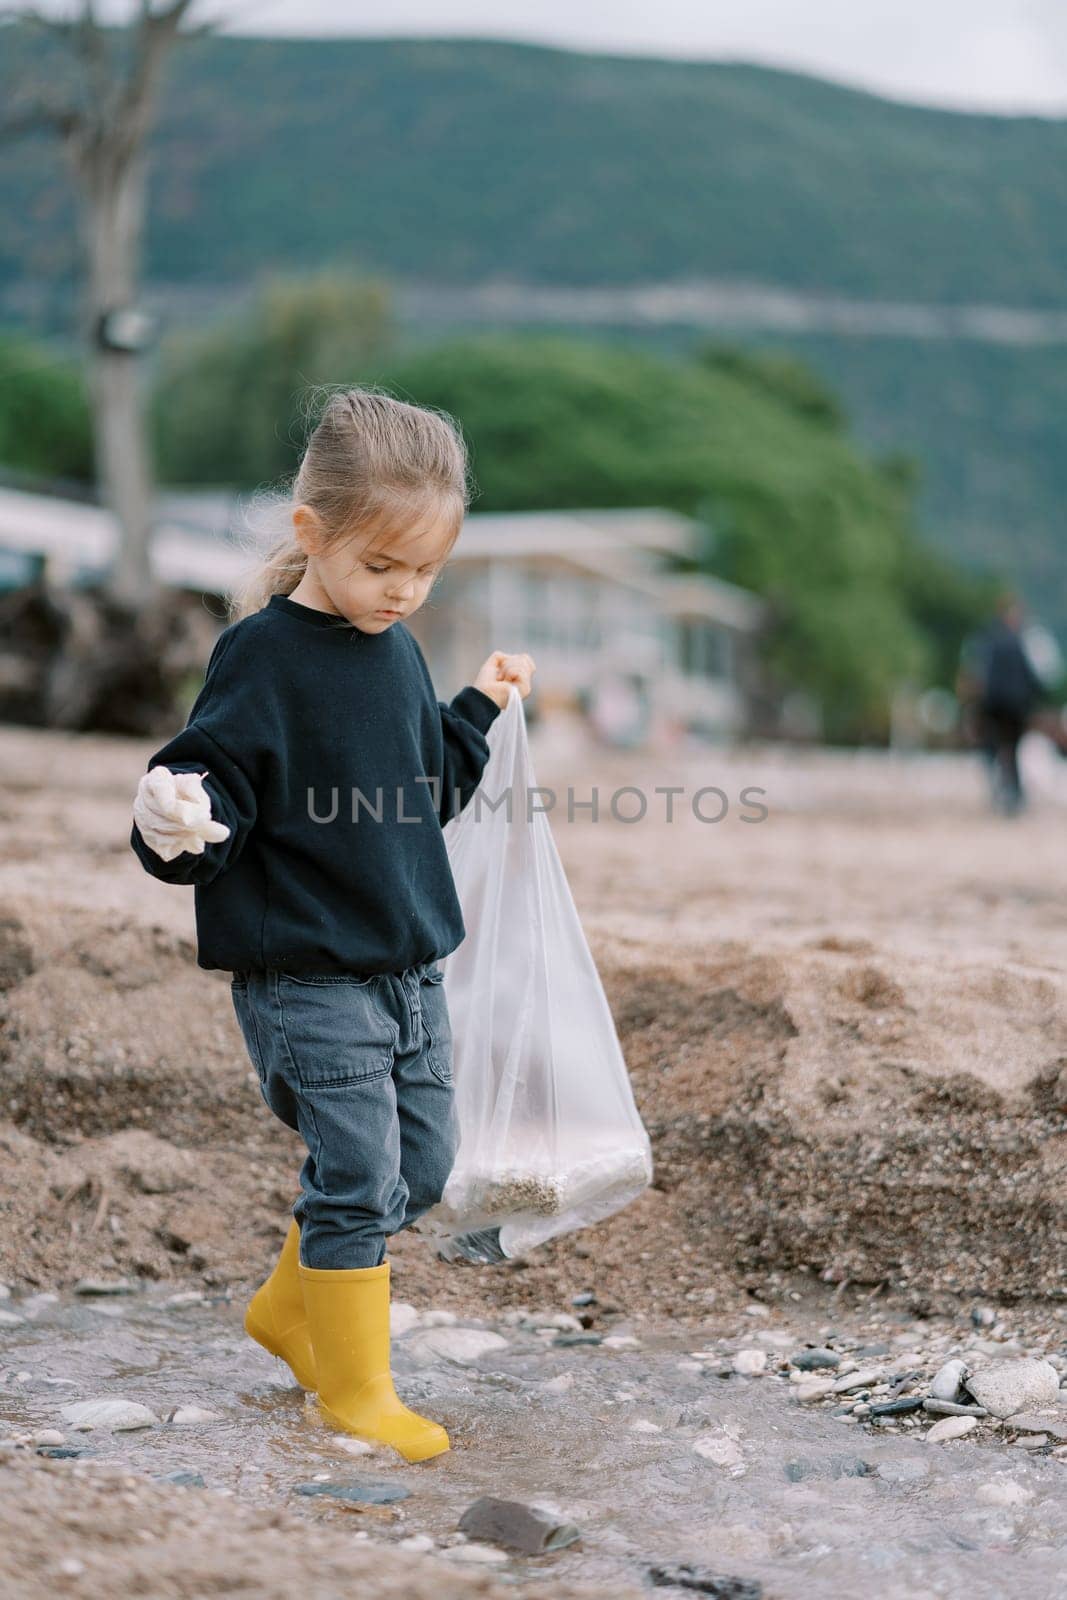 Little girl in rubber boots and gloves with a bag walks through shallow water looking for garbage by Nadtochiy